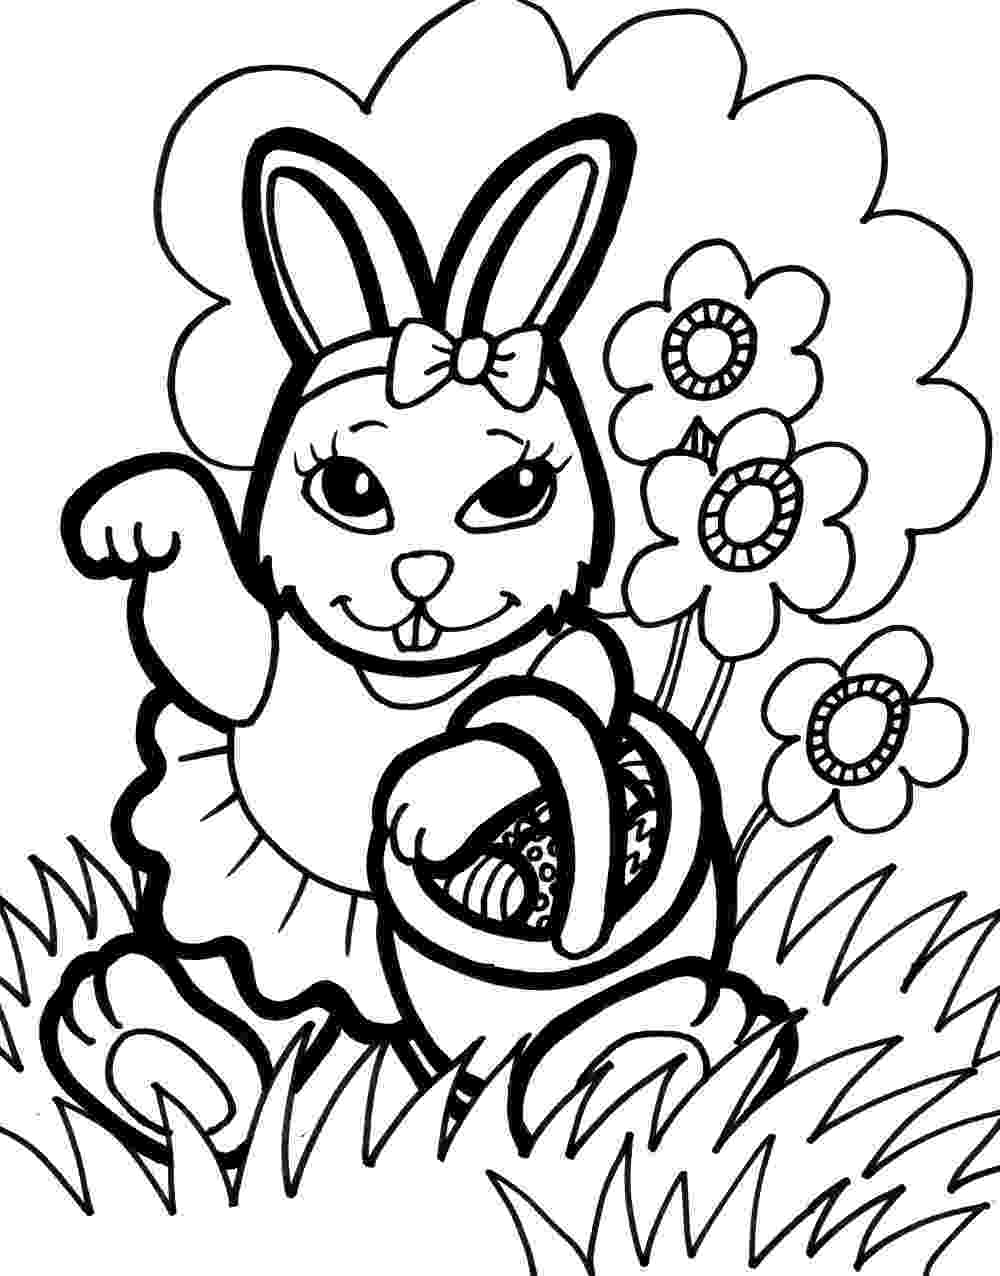 coloring pictures of rabbits bunny coloring pages best coloring pages for kids of pictures coloring rabbits 